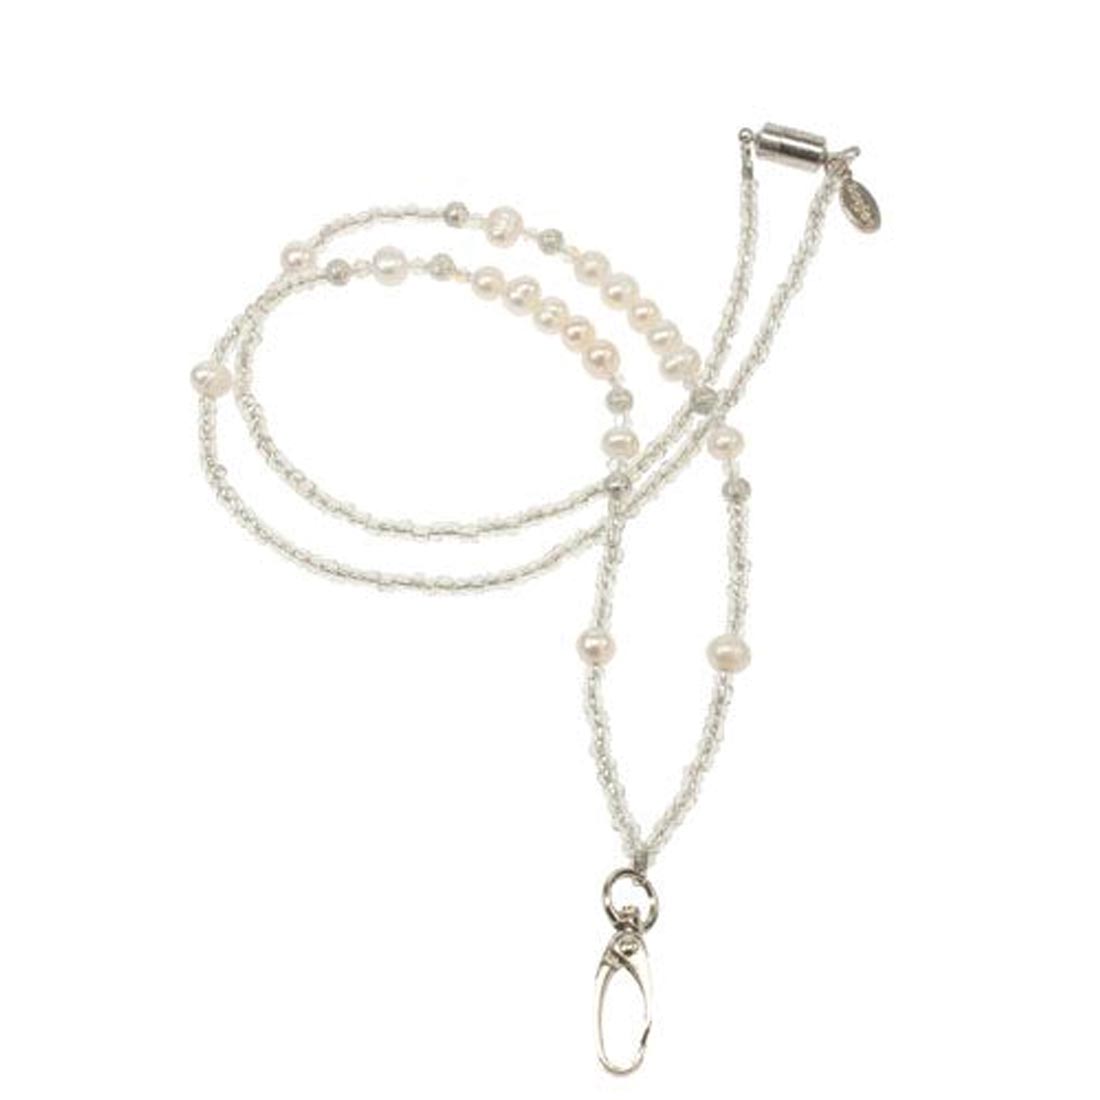 Clip Lanyard with Pearly Beads